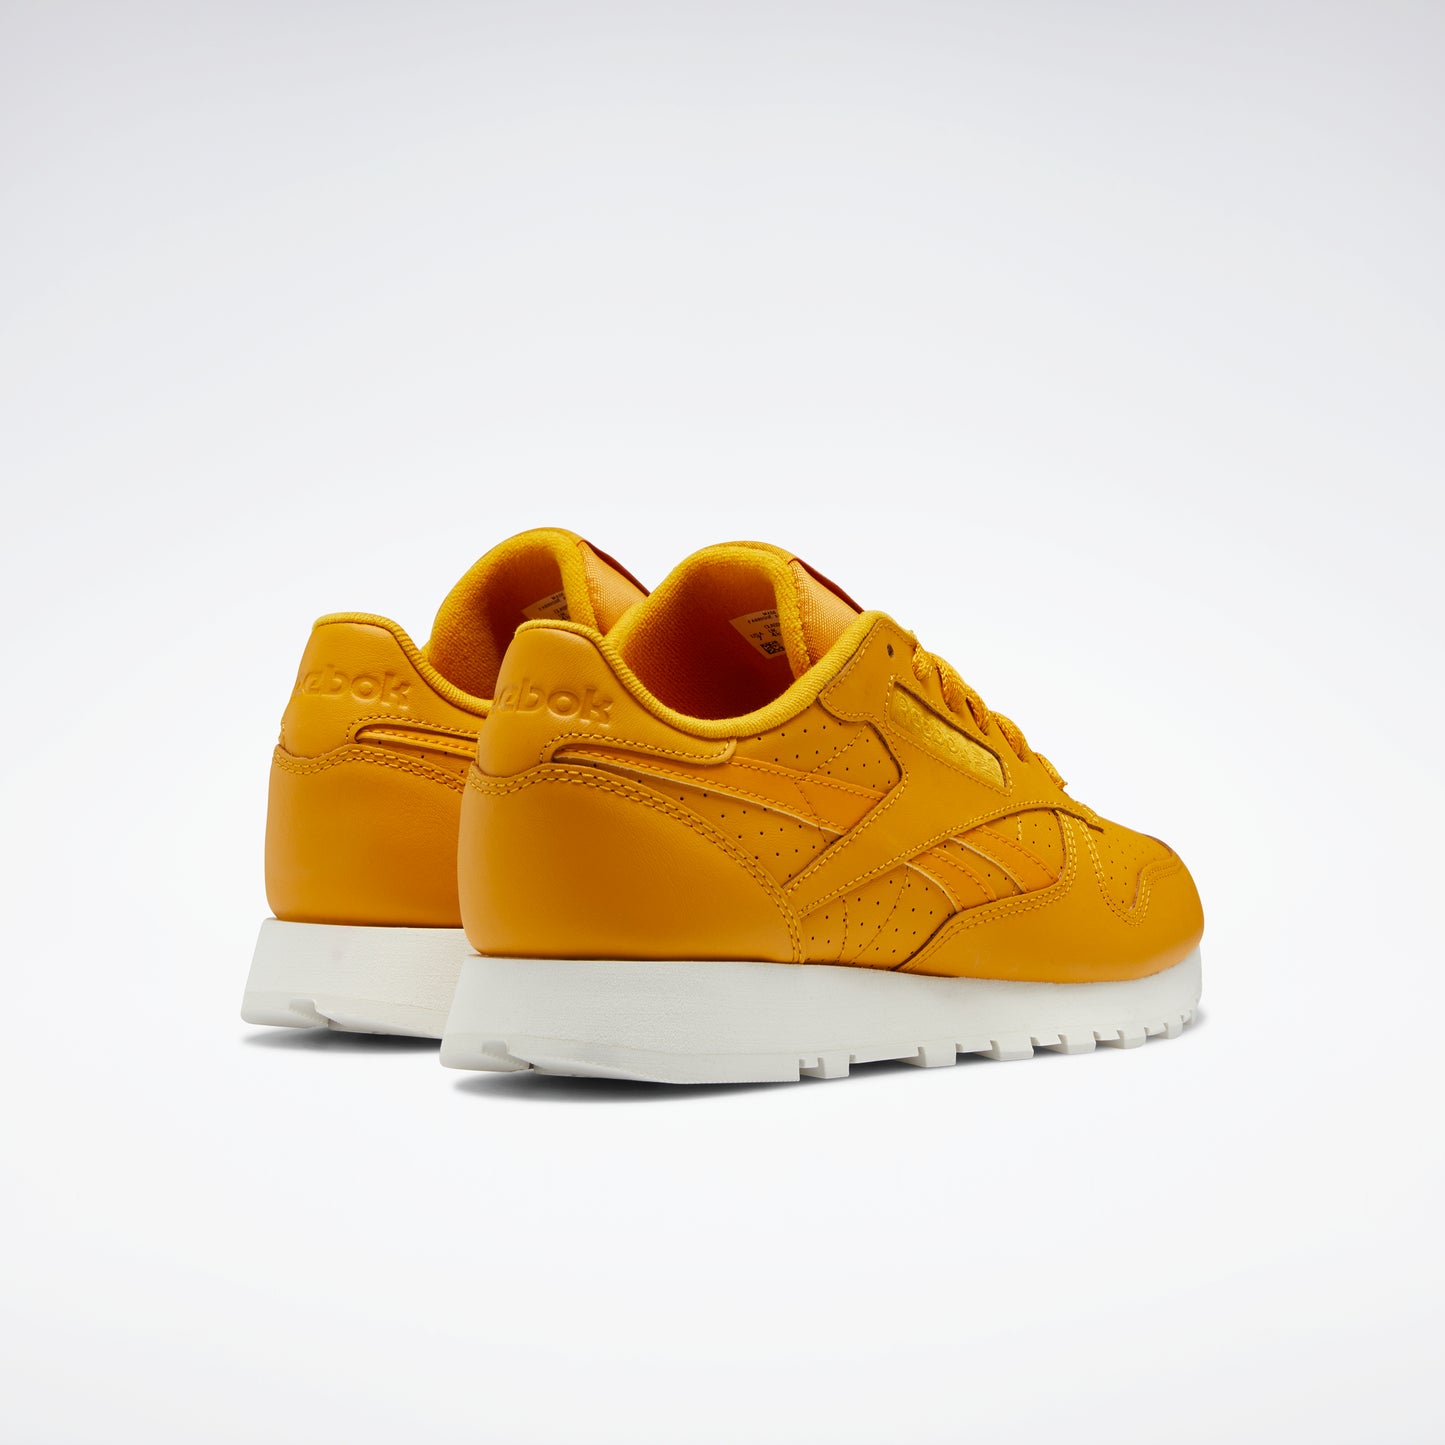 Chaussures Reebok Footwear Women Classic Leather Shoes Bright Ochre/Bright Ochre/Chal